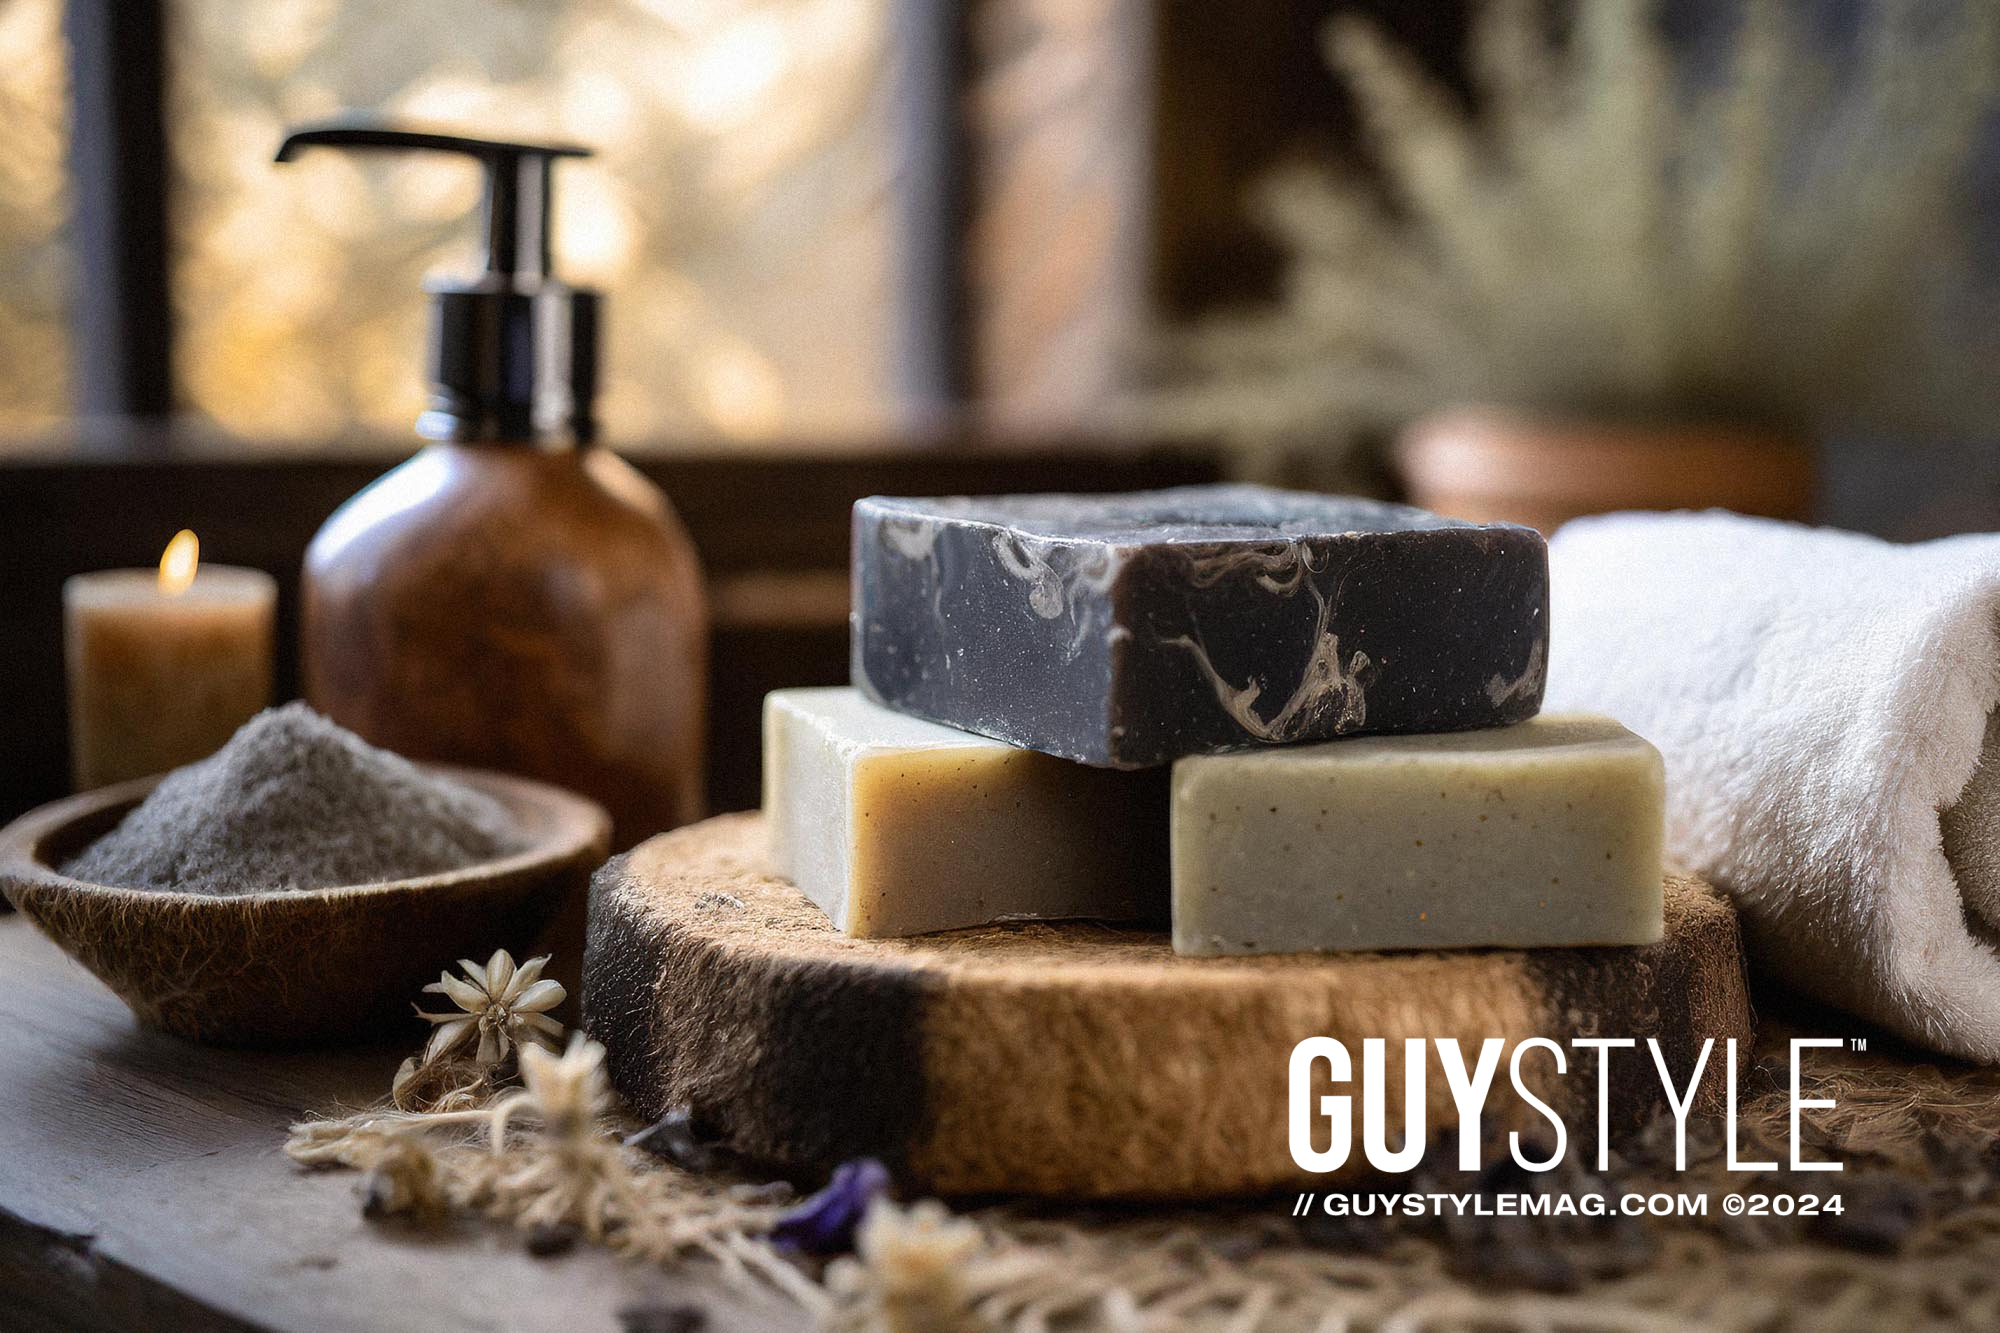 The Suave Soap Revolution: HARD NEW YORK's Charcoal Bar for Men – Presented by HARD NEW YORK Skincare for Men